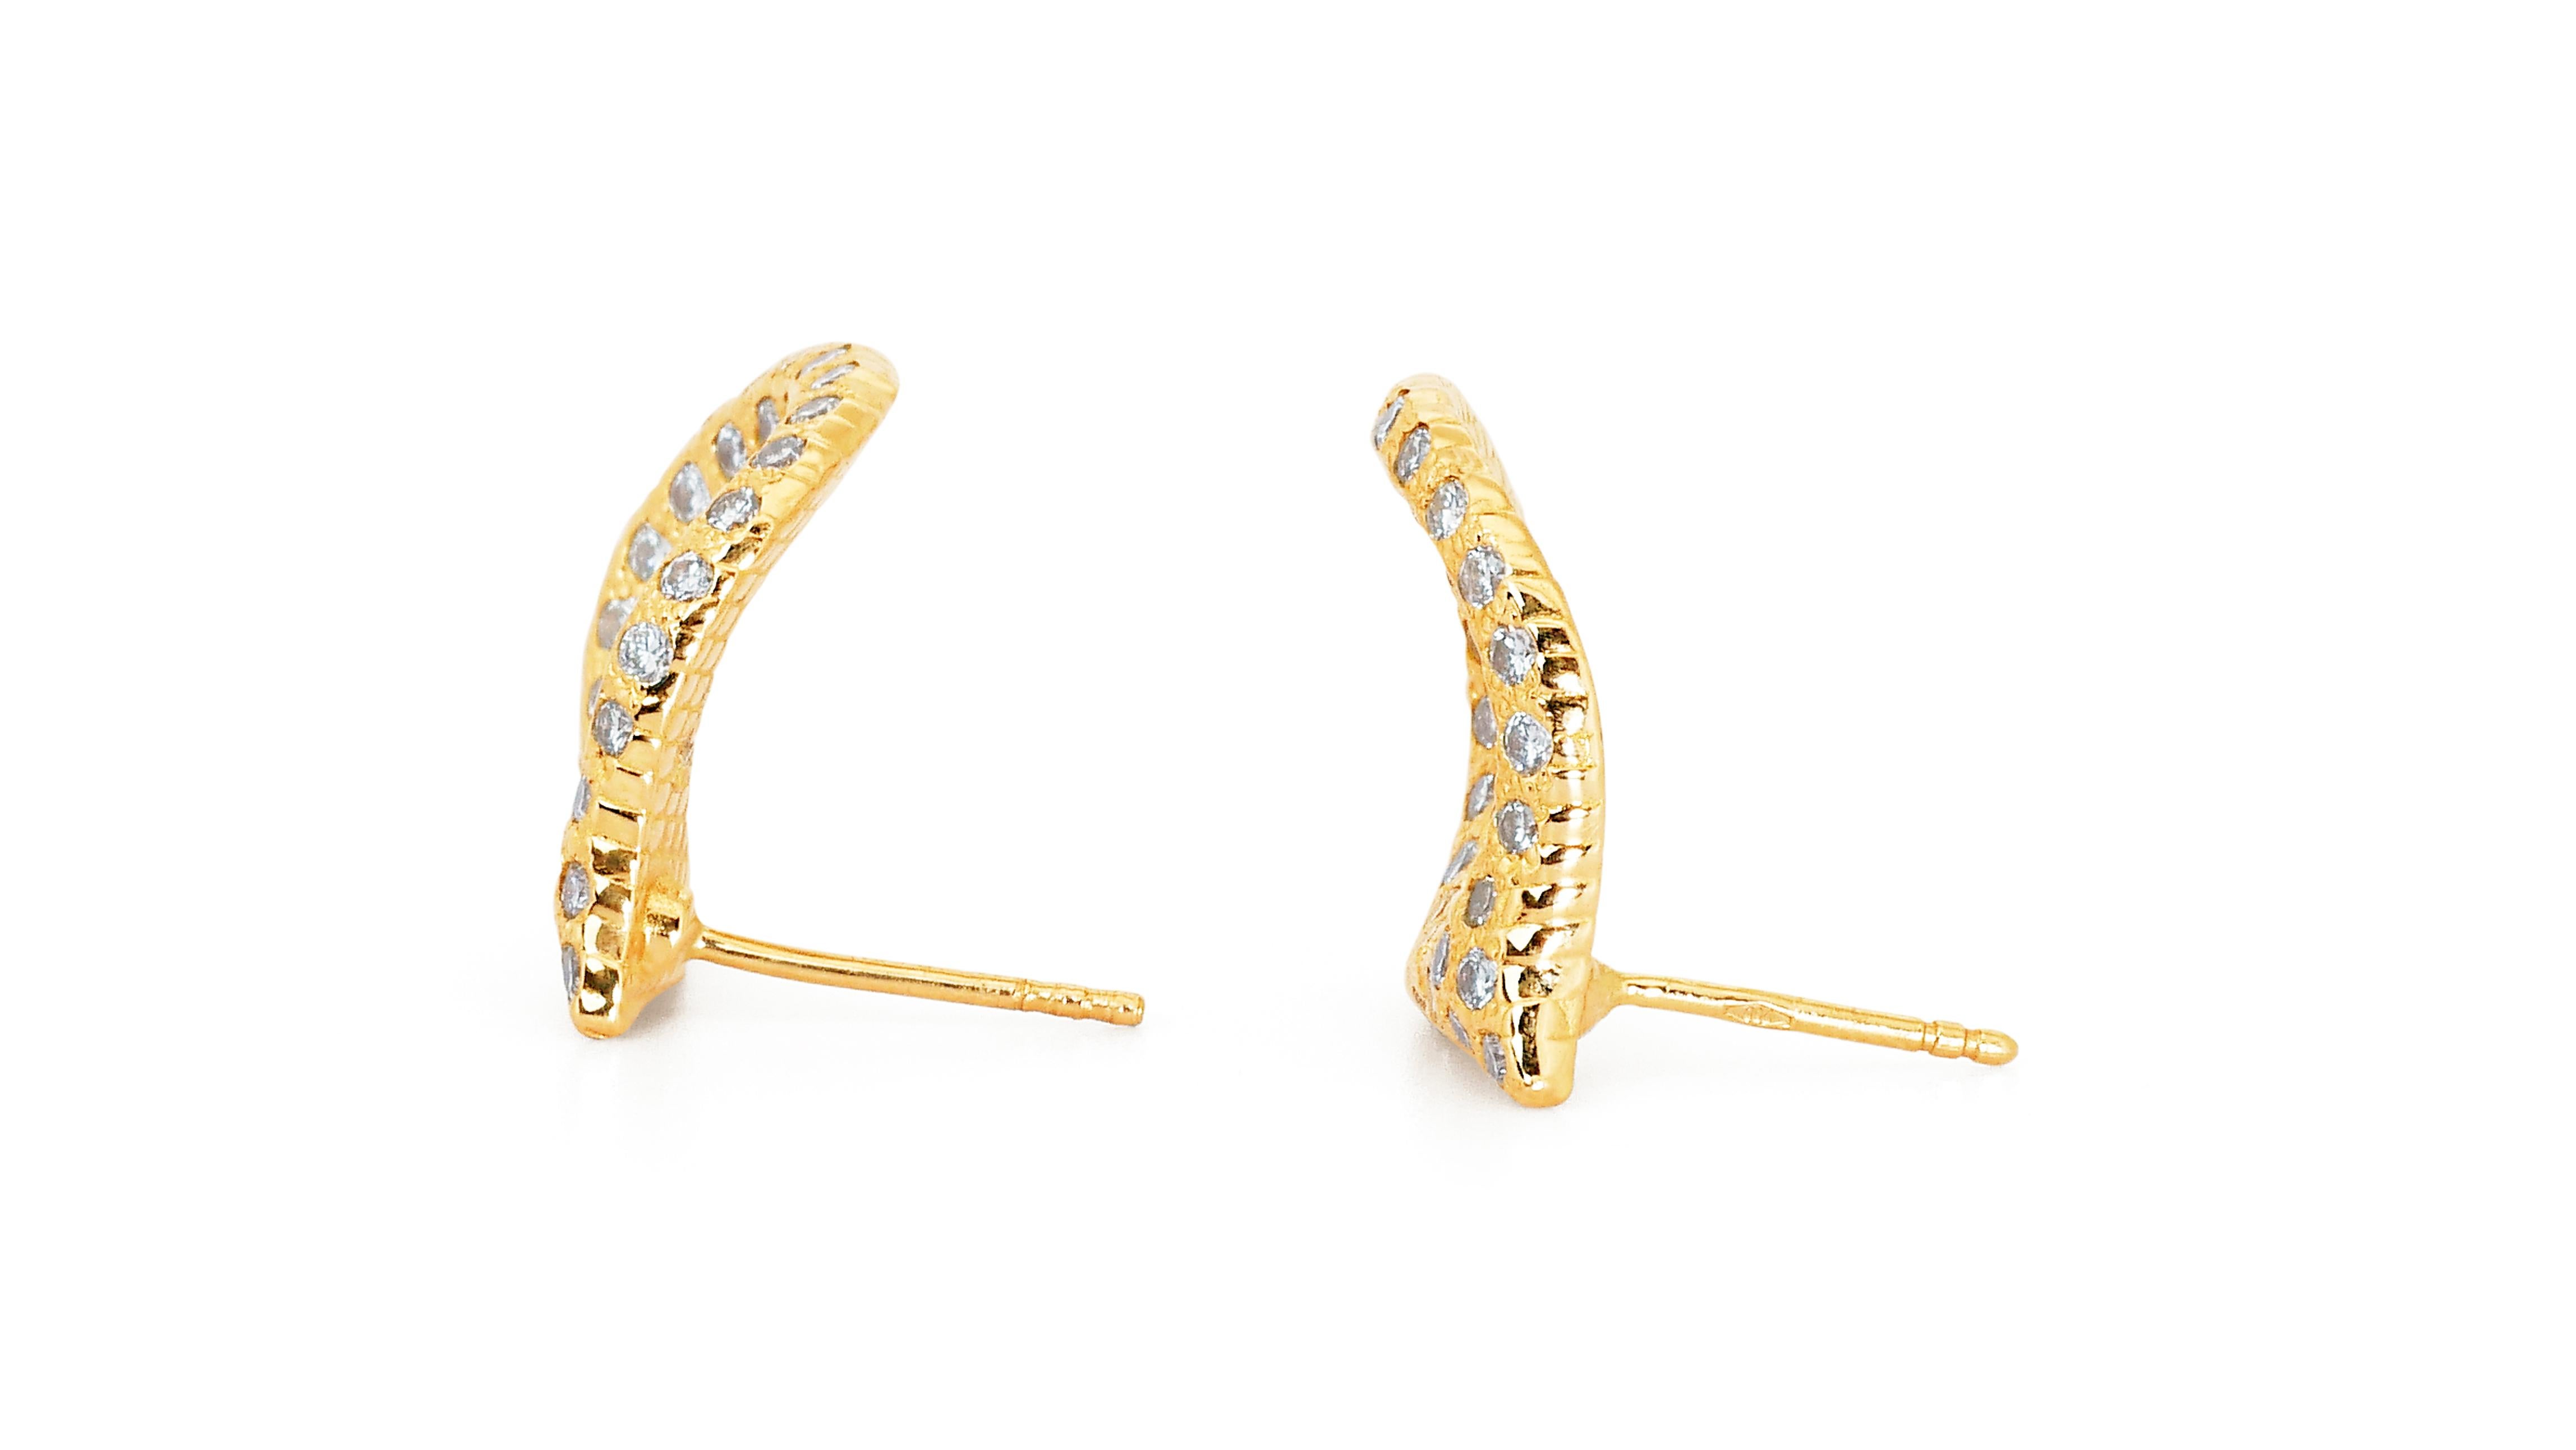 Glamorous 18k Yellow Gold Earrings w/ 1.28ct Natural Diamonds IGI Certificate In New Condition For Sale In רמת גן, IL